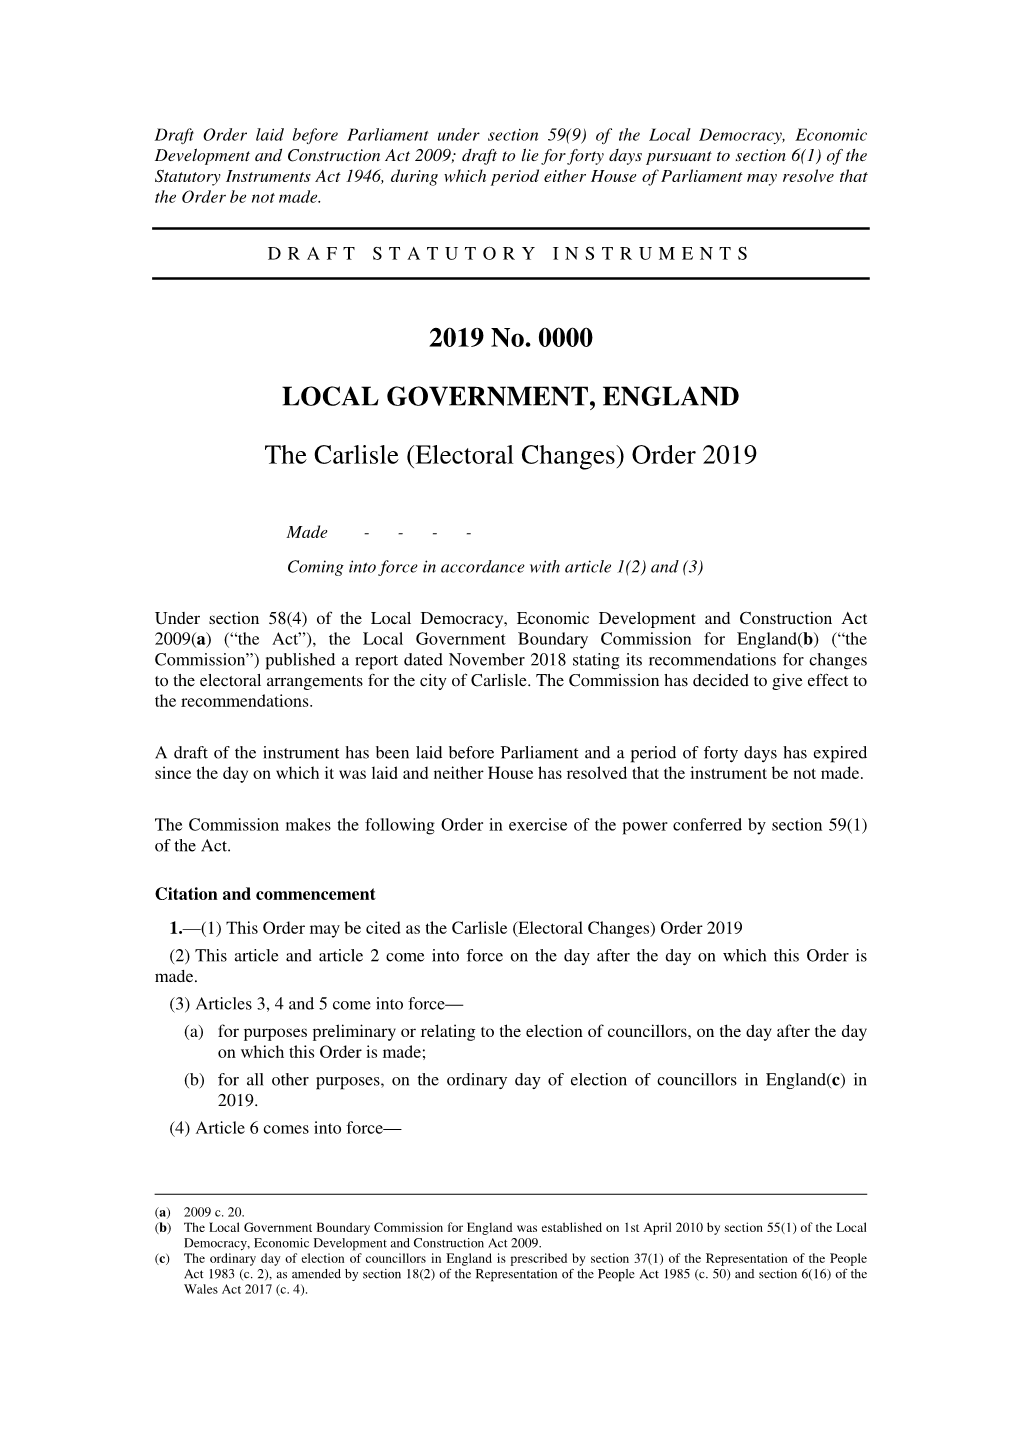 The Carlisle (Electoral Changes) Order 2019